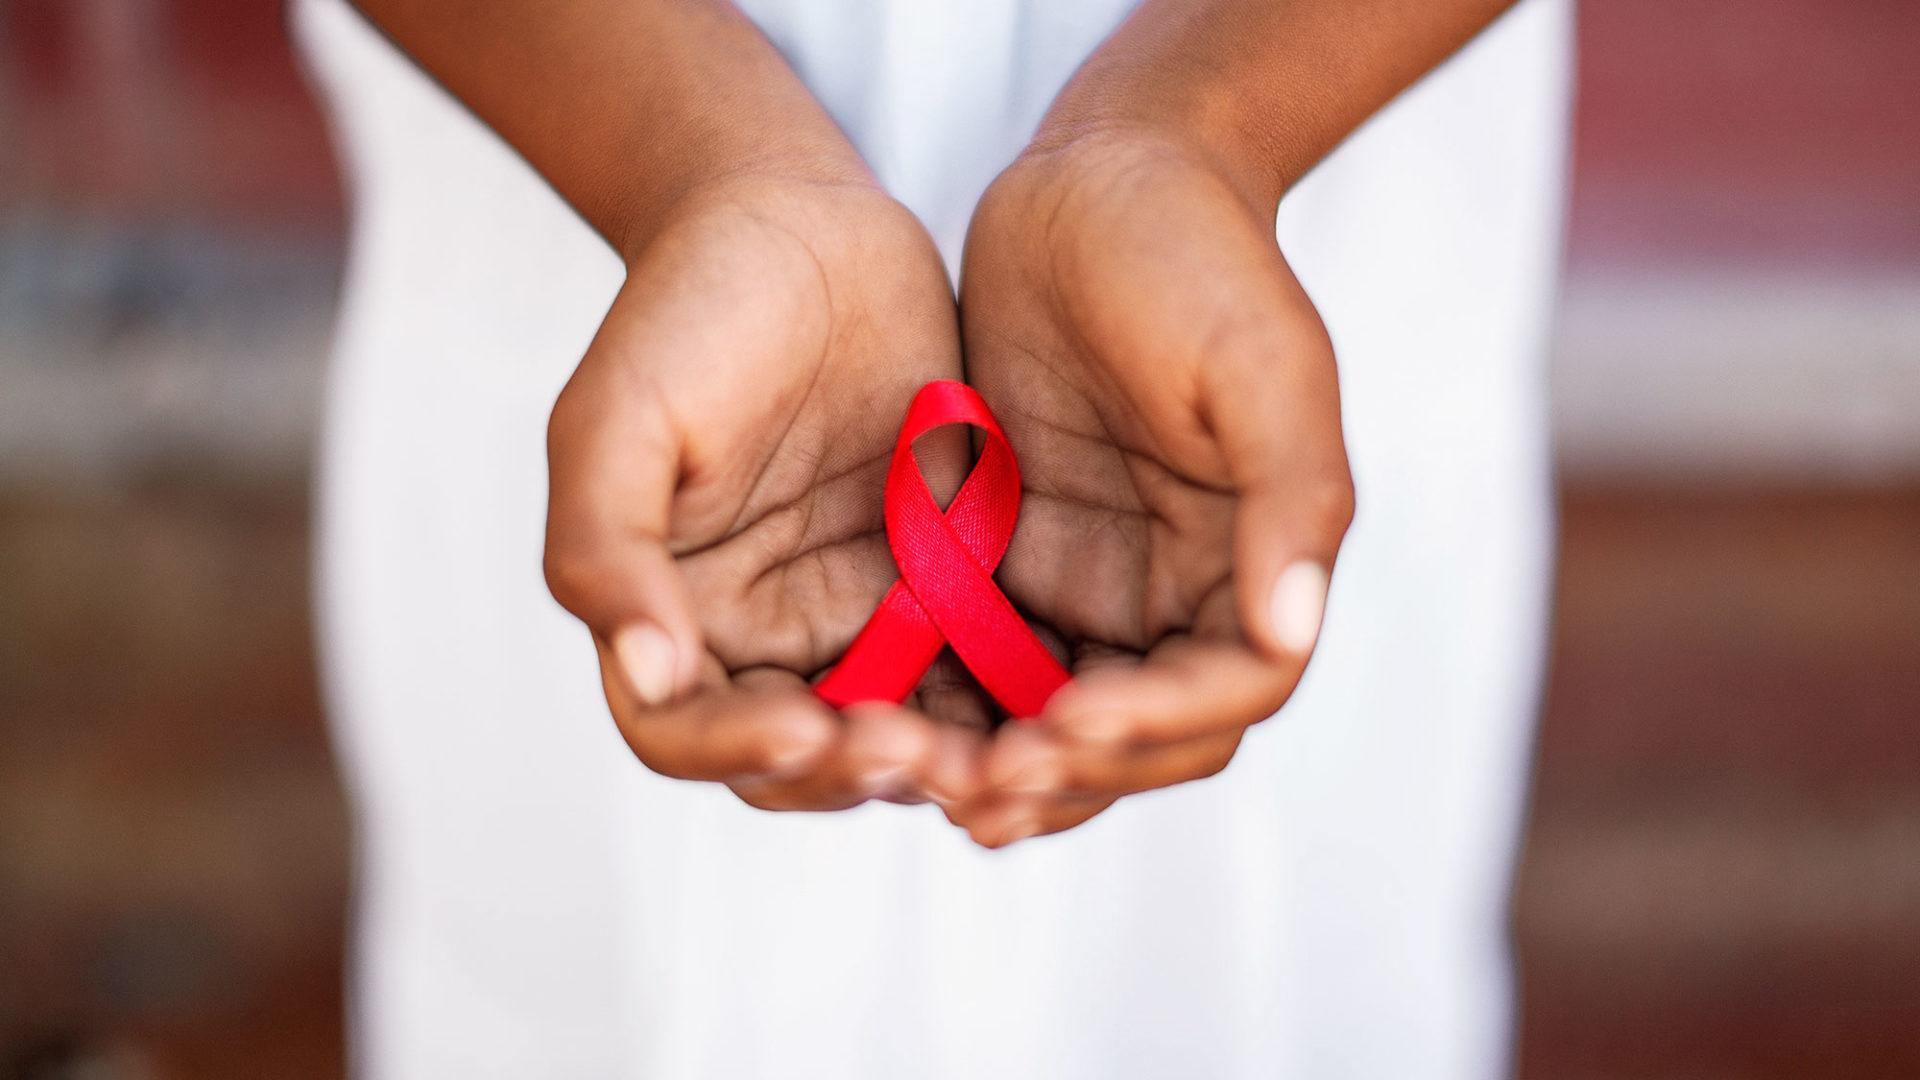 National Women And Girls HIV AIDS Awareness Day: Let's Talk